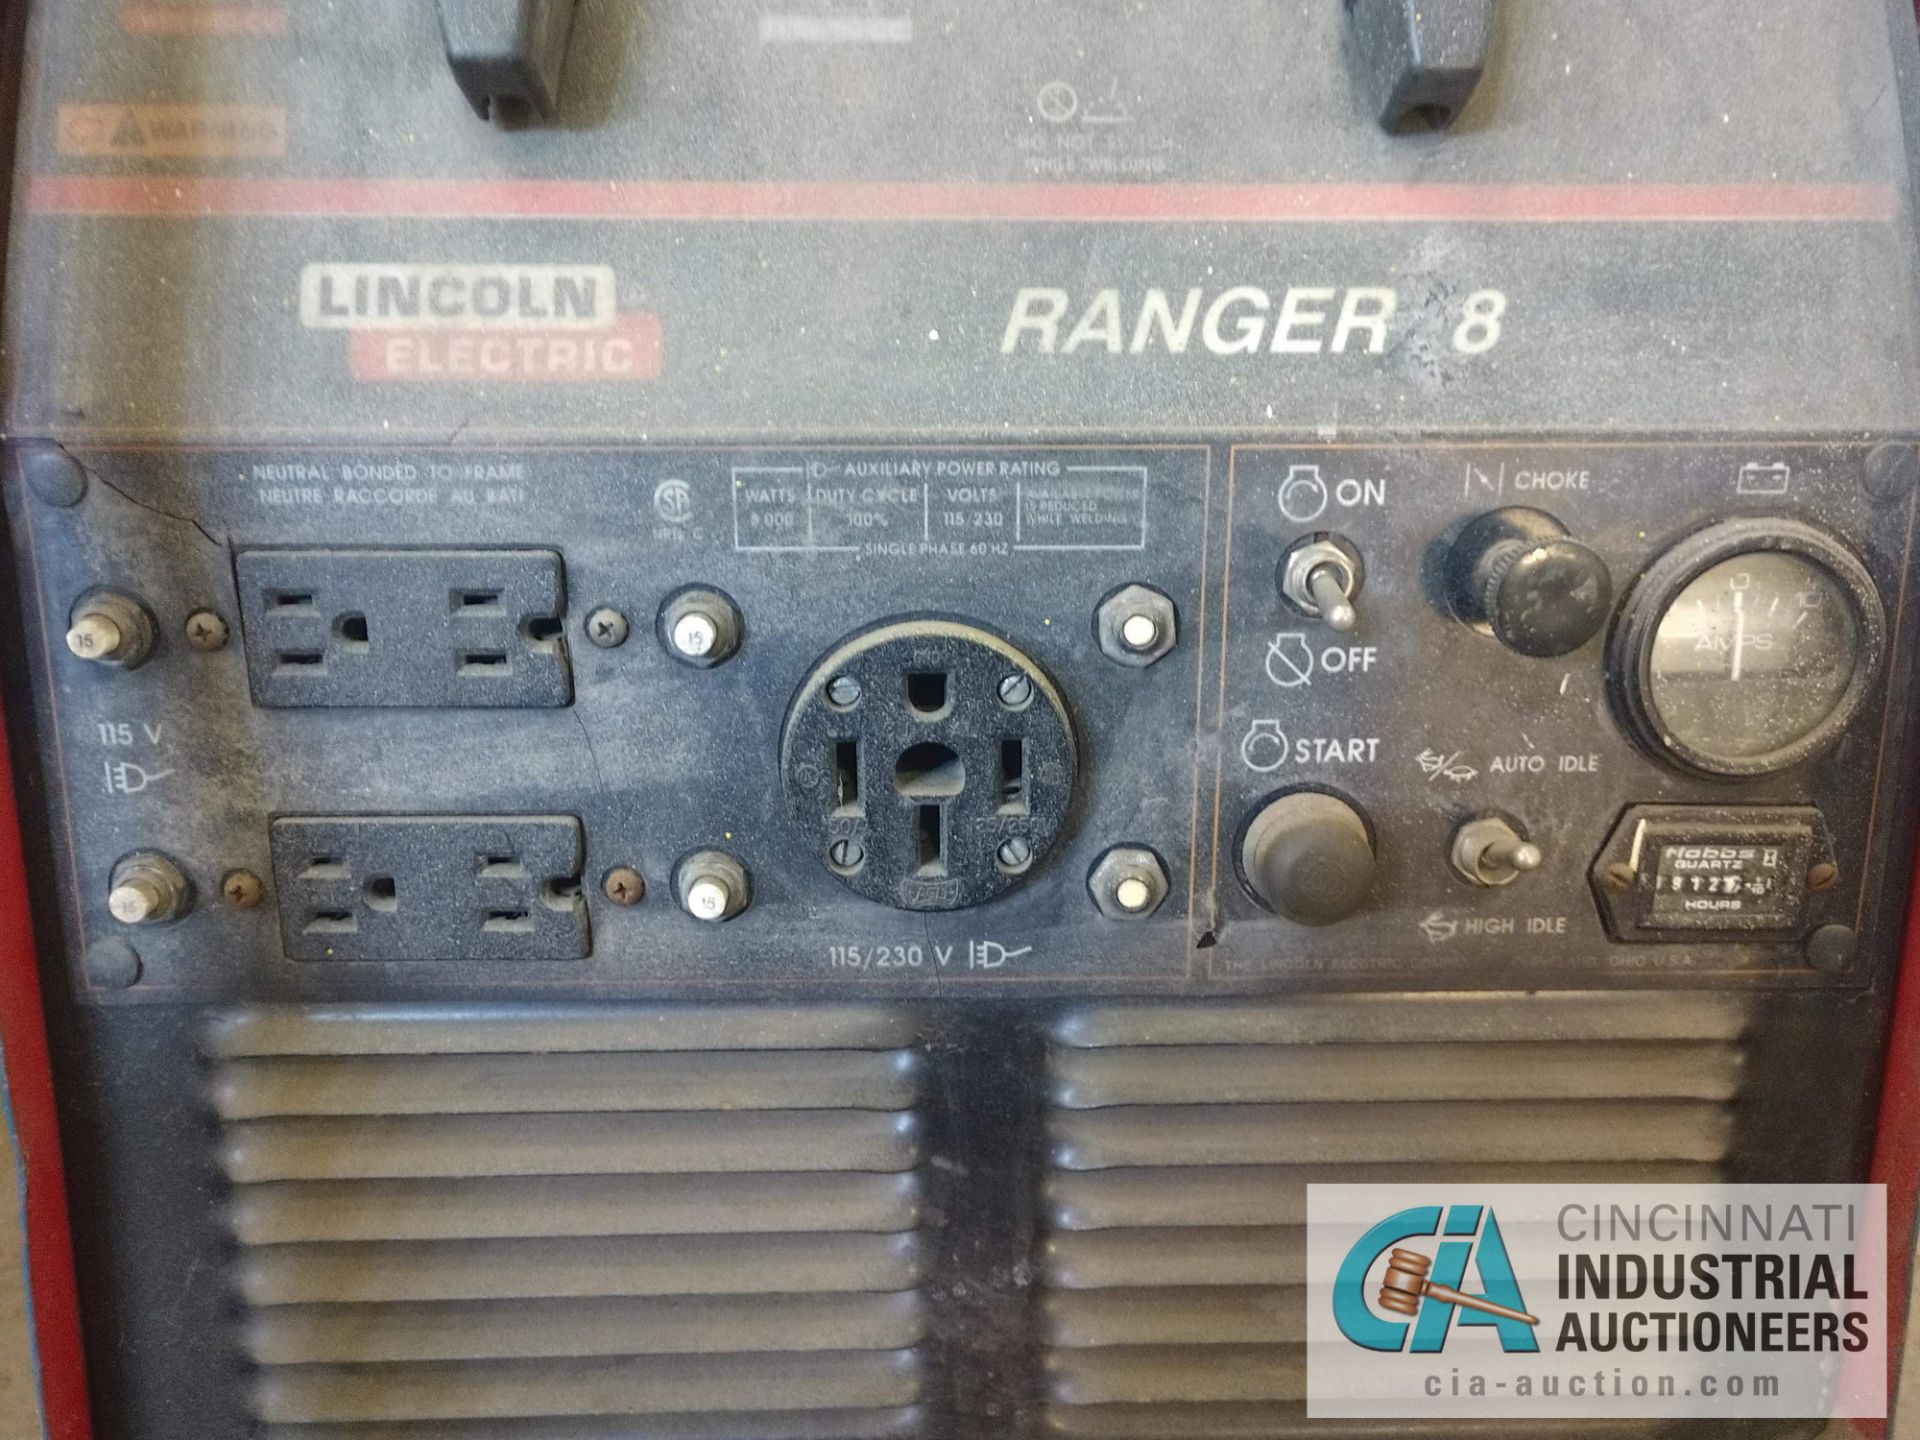 LINCOLN MODEL RANGER 8 WELDER GENERATOR - $20.00 Rigging Fee Due to Onsite Rigger - Located in - Image 4 of 4